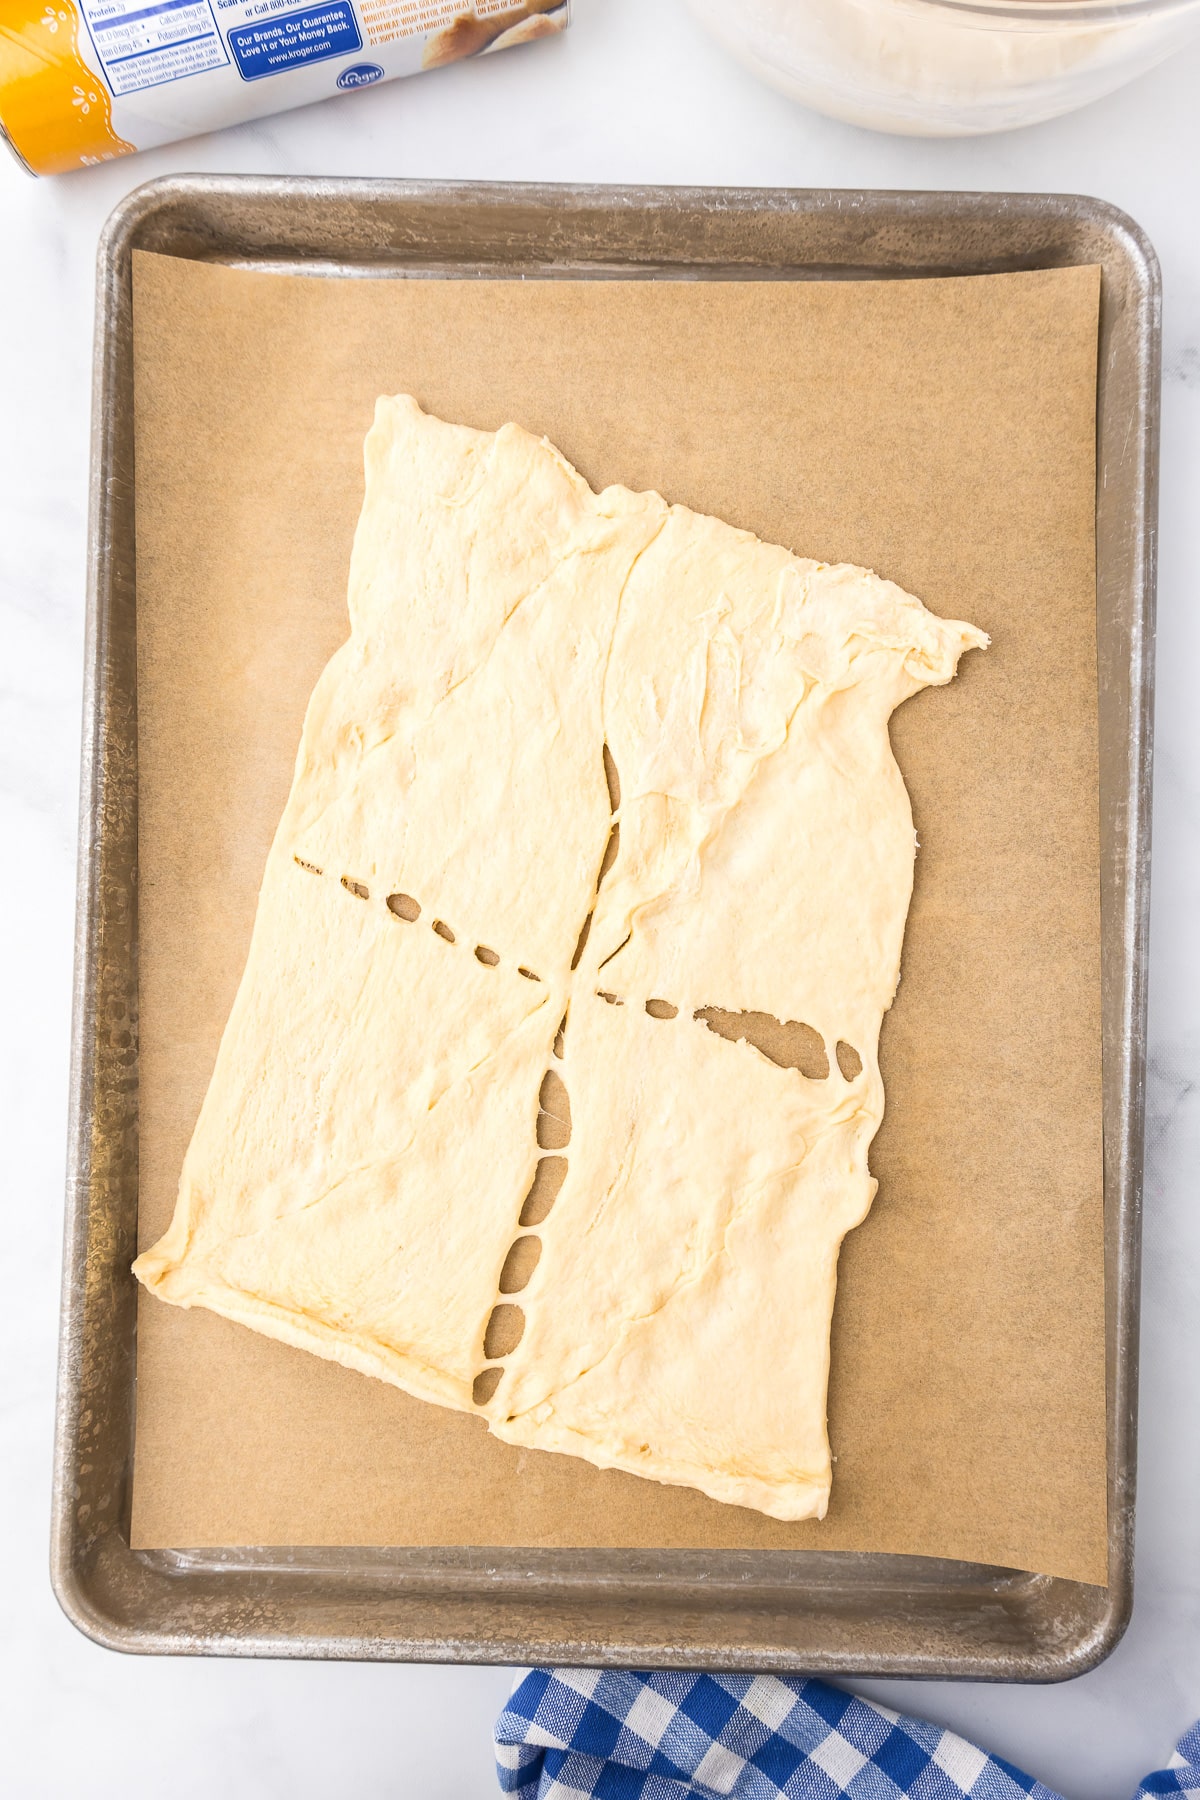 A sheet of crescent roll dough spread out on a parchment paper lined baking sheet, with some of the dough seams pressed together.